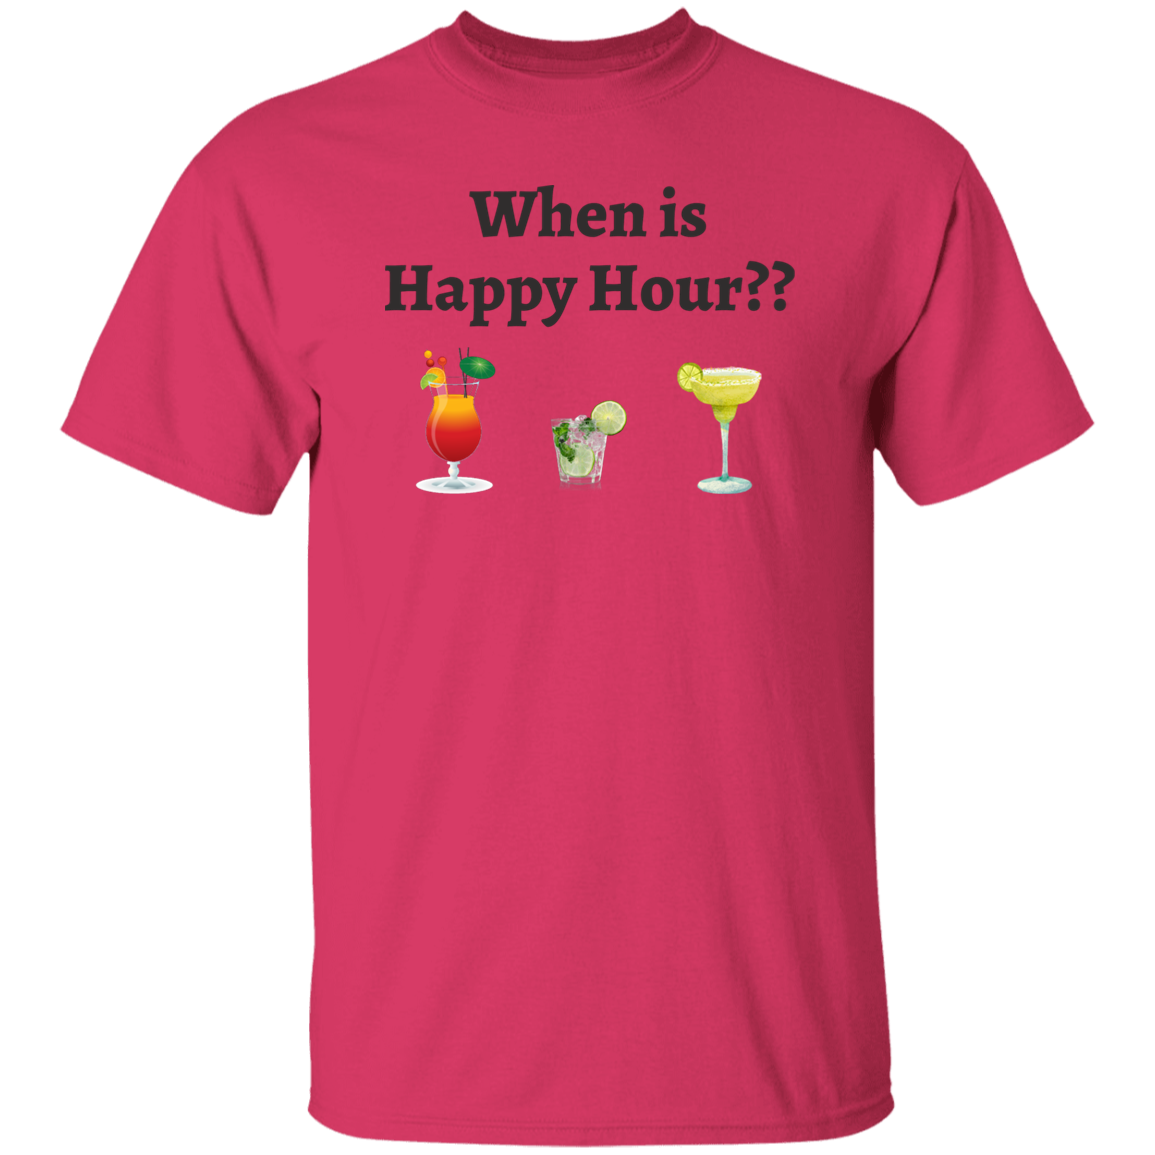 When is Happy Hour